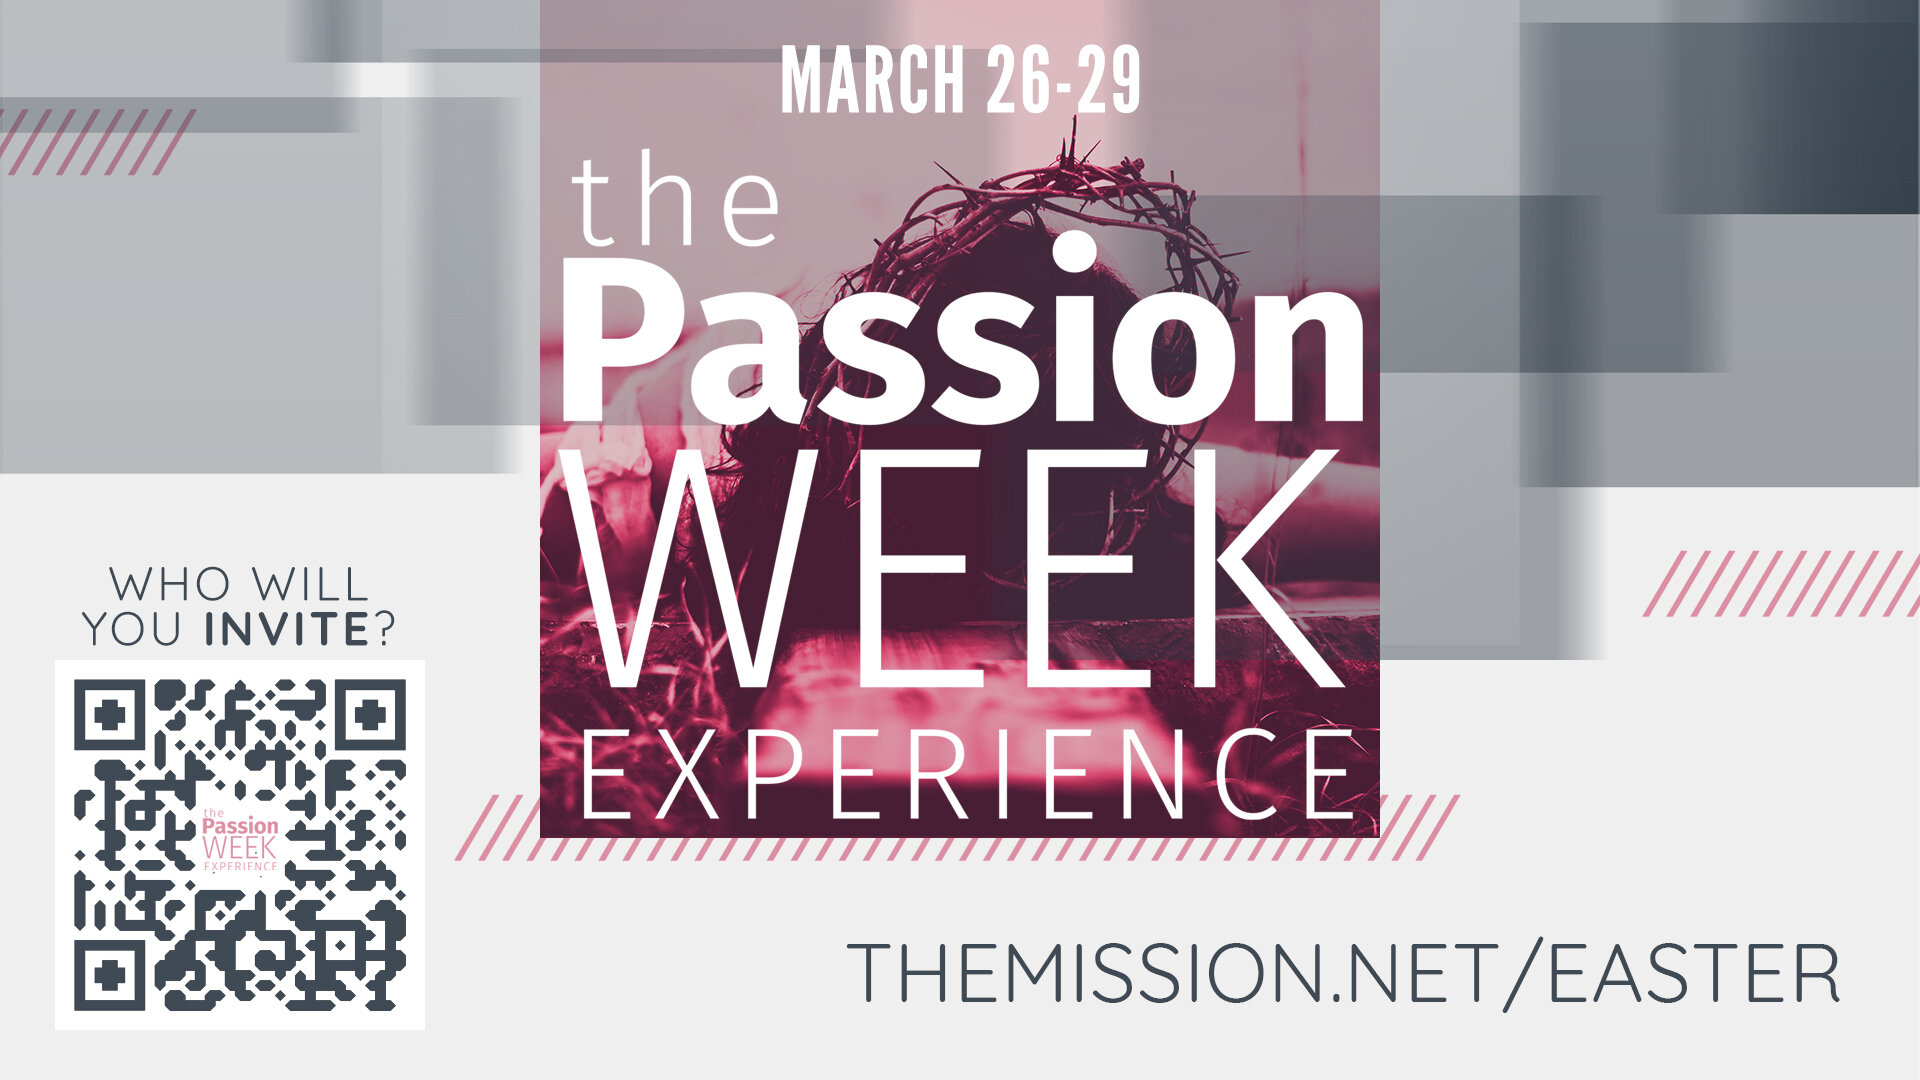 Reserve your time for The Passion Week Experience!
March 26, 27, 28, or 29
https://themission.net/pwe